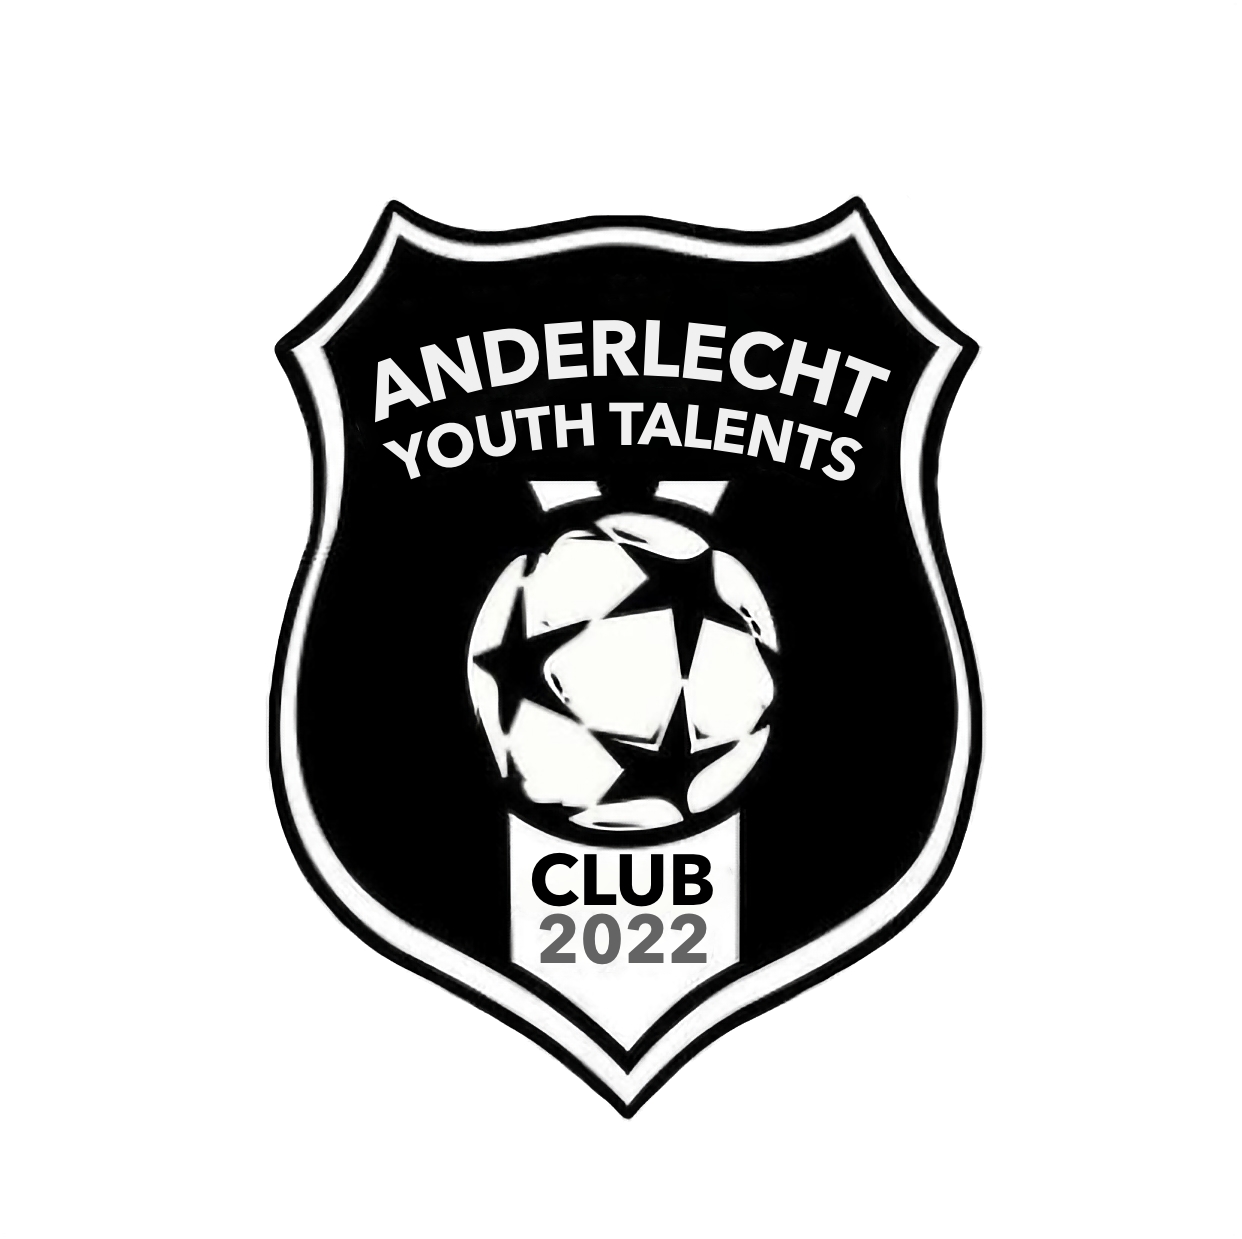 1 - Anderlecht Youth Talents